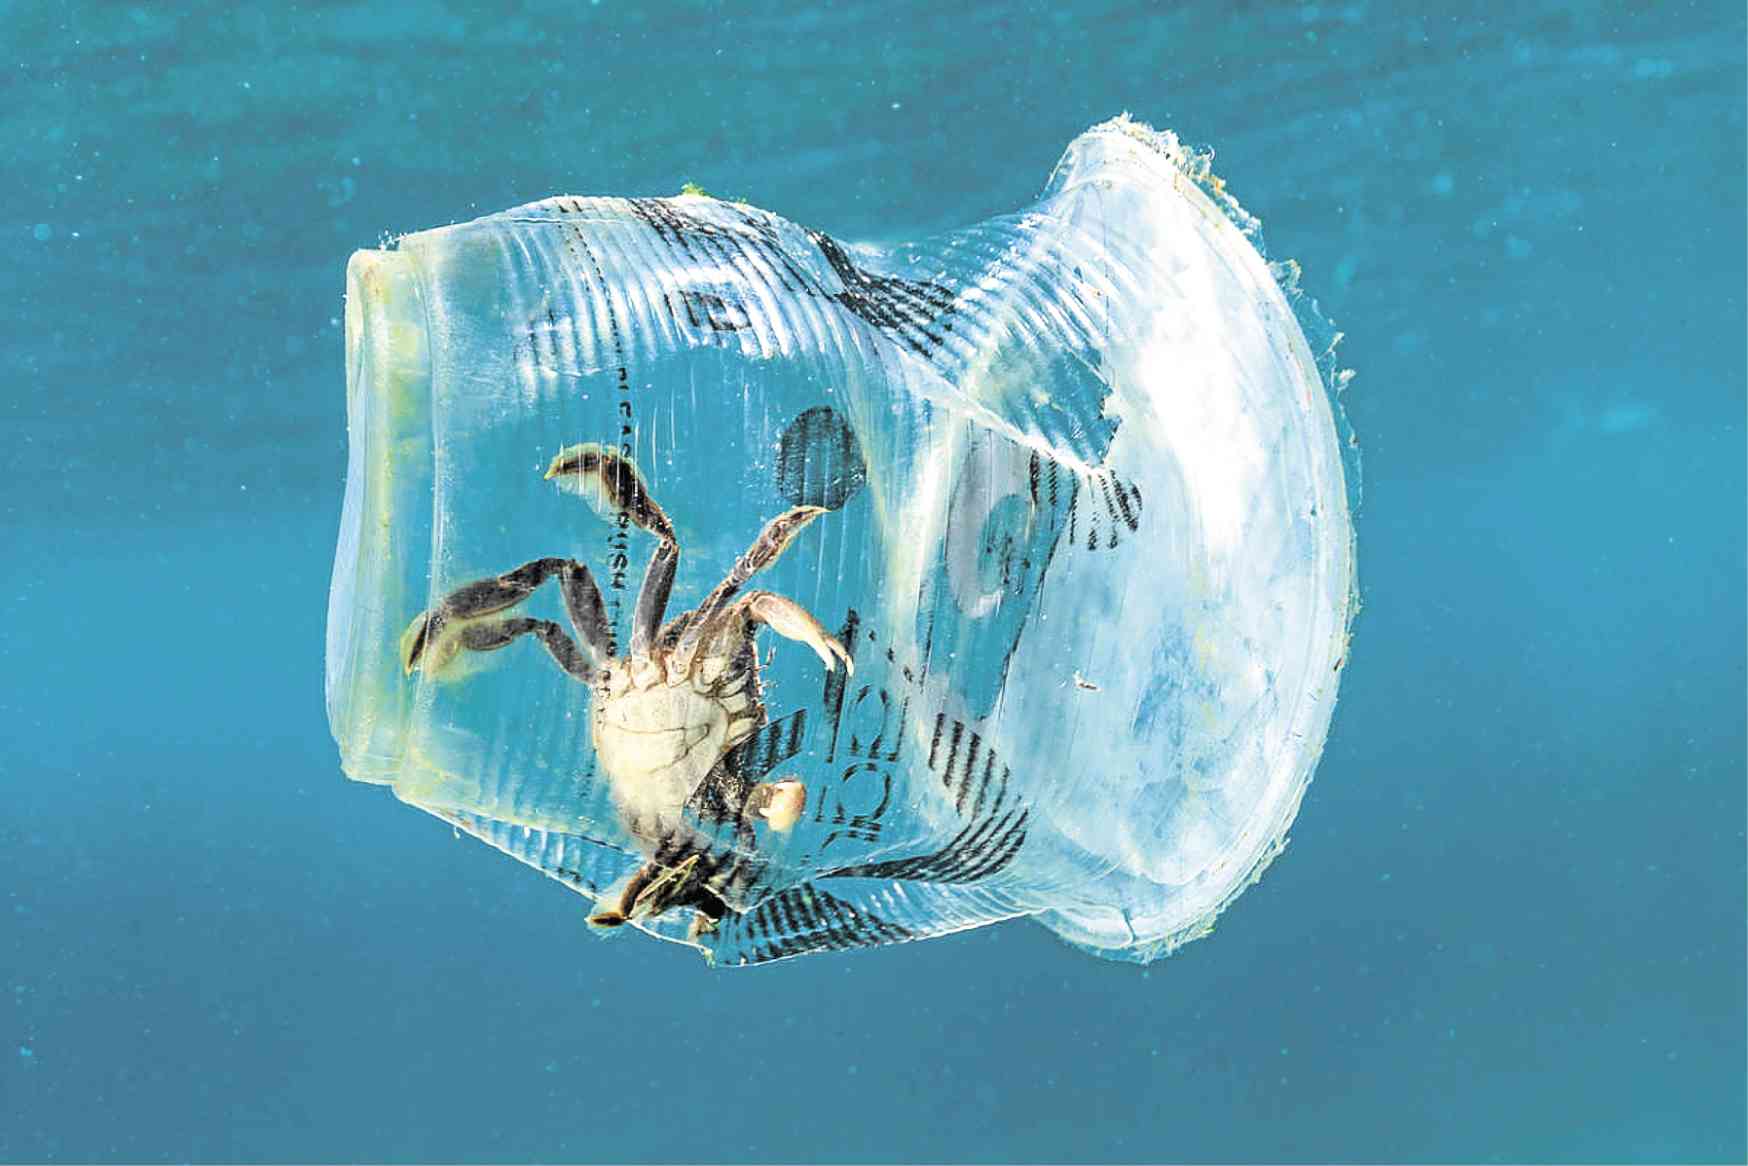 PH marine life center not spared from plastic